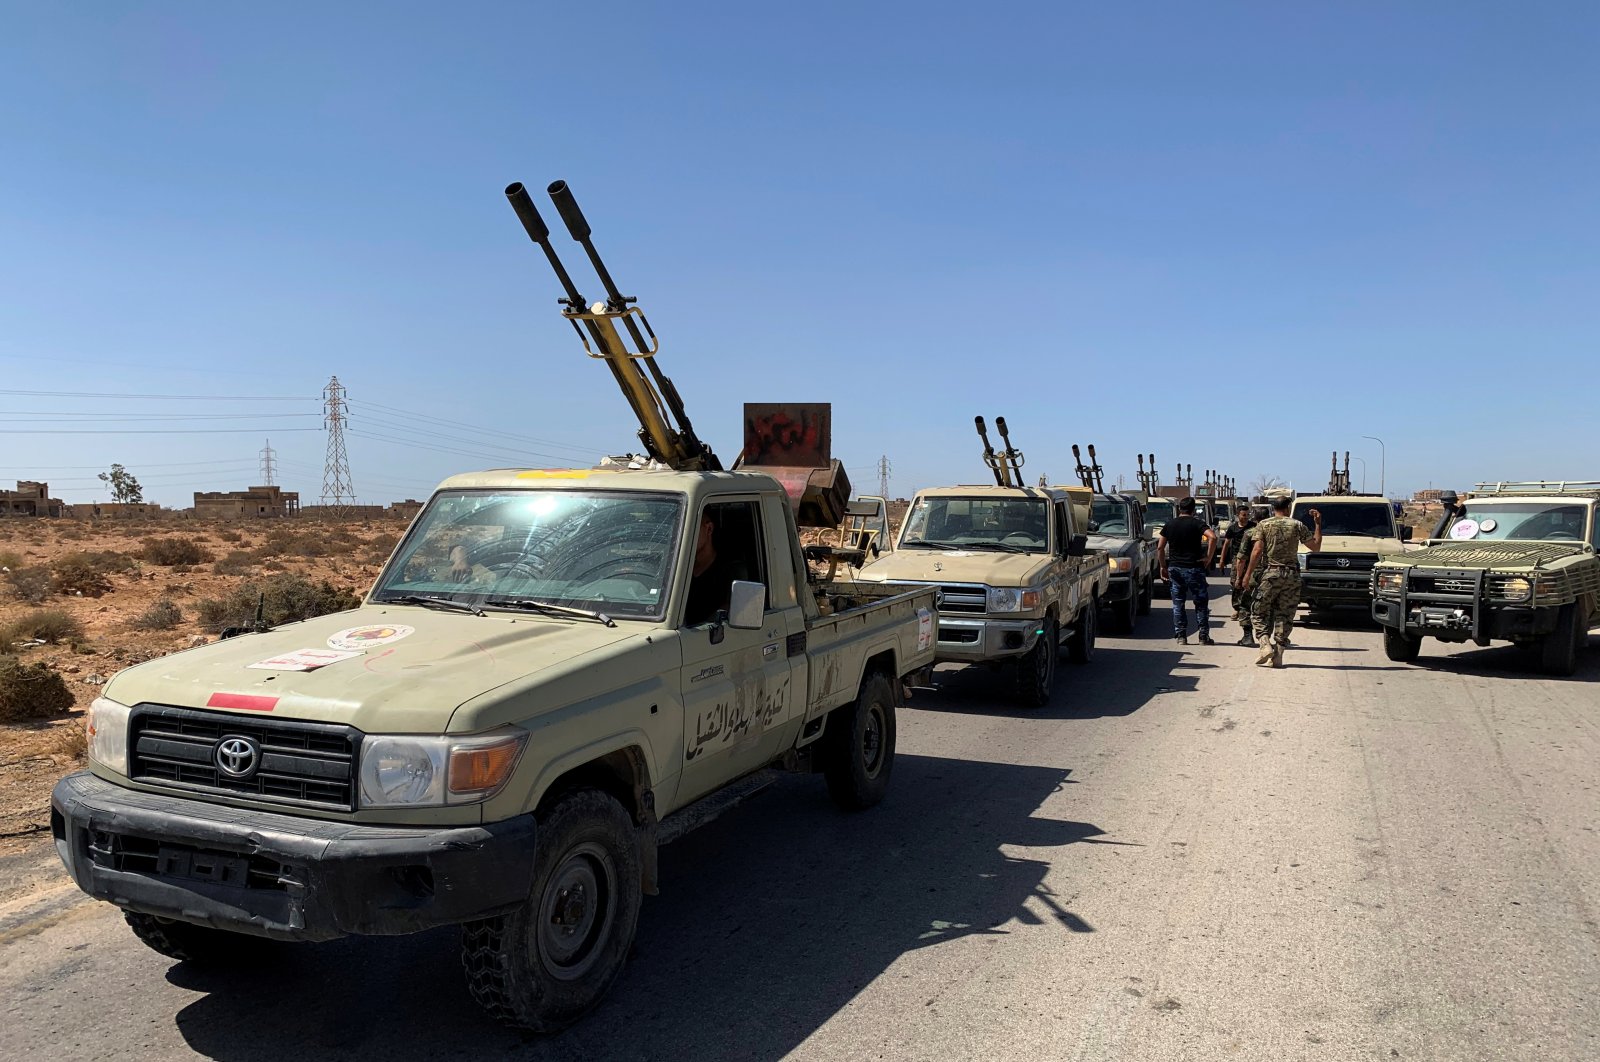 The Libyan army gives Haftar's forces a deadline to open